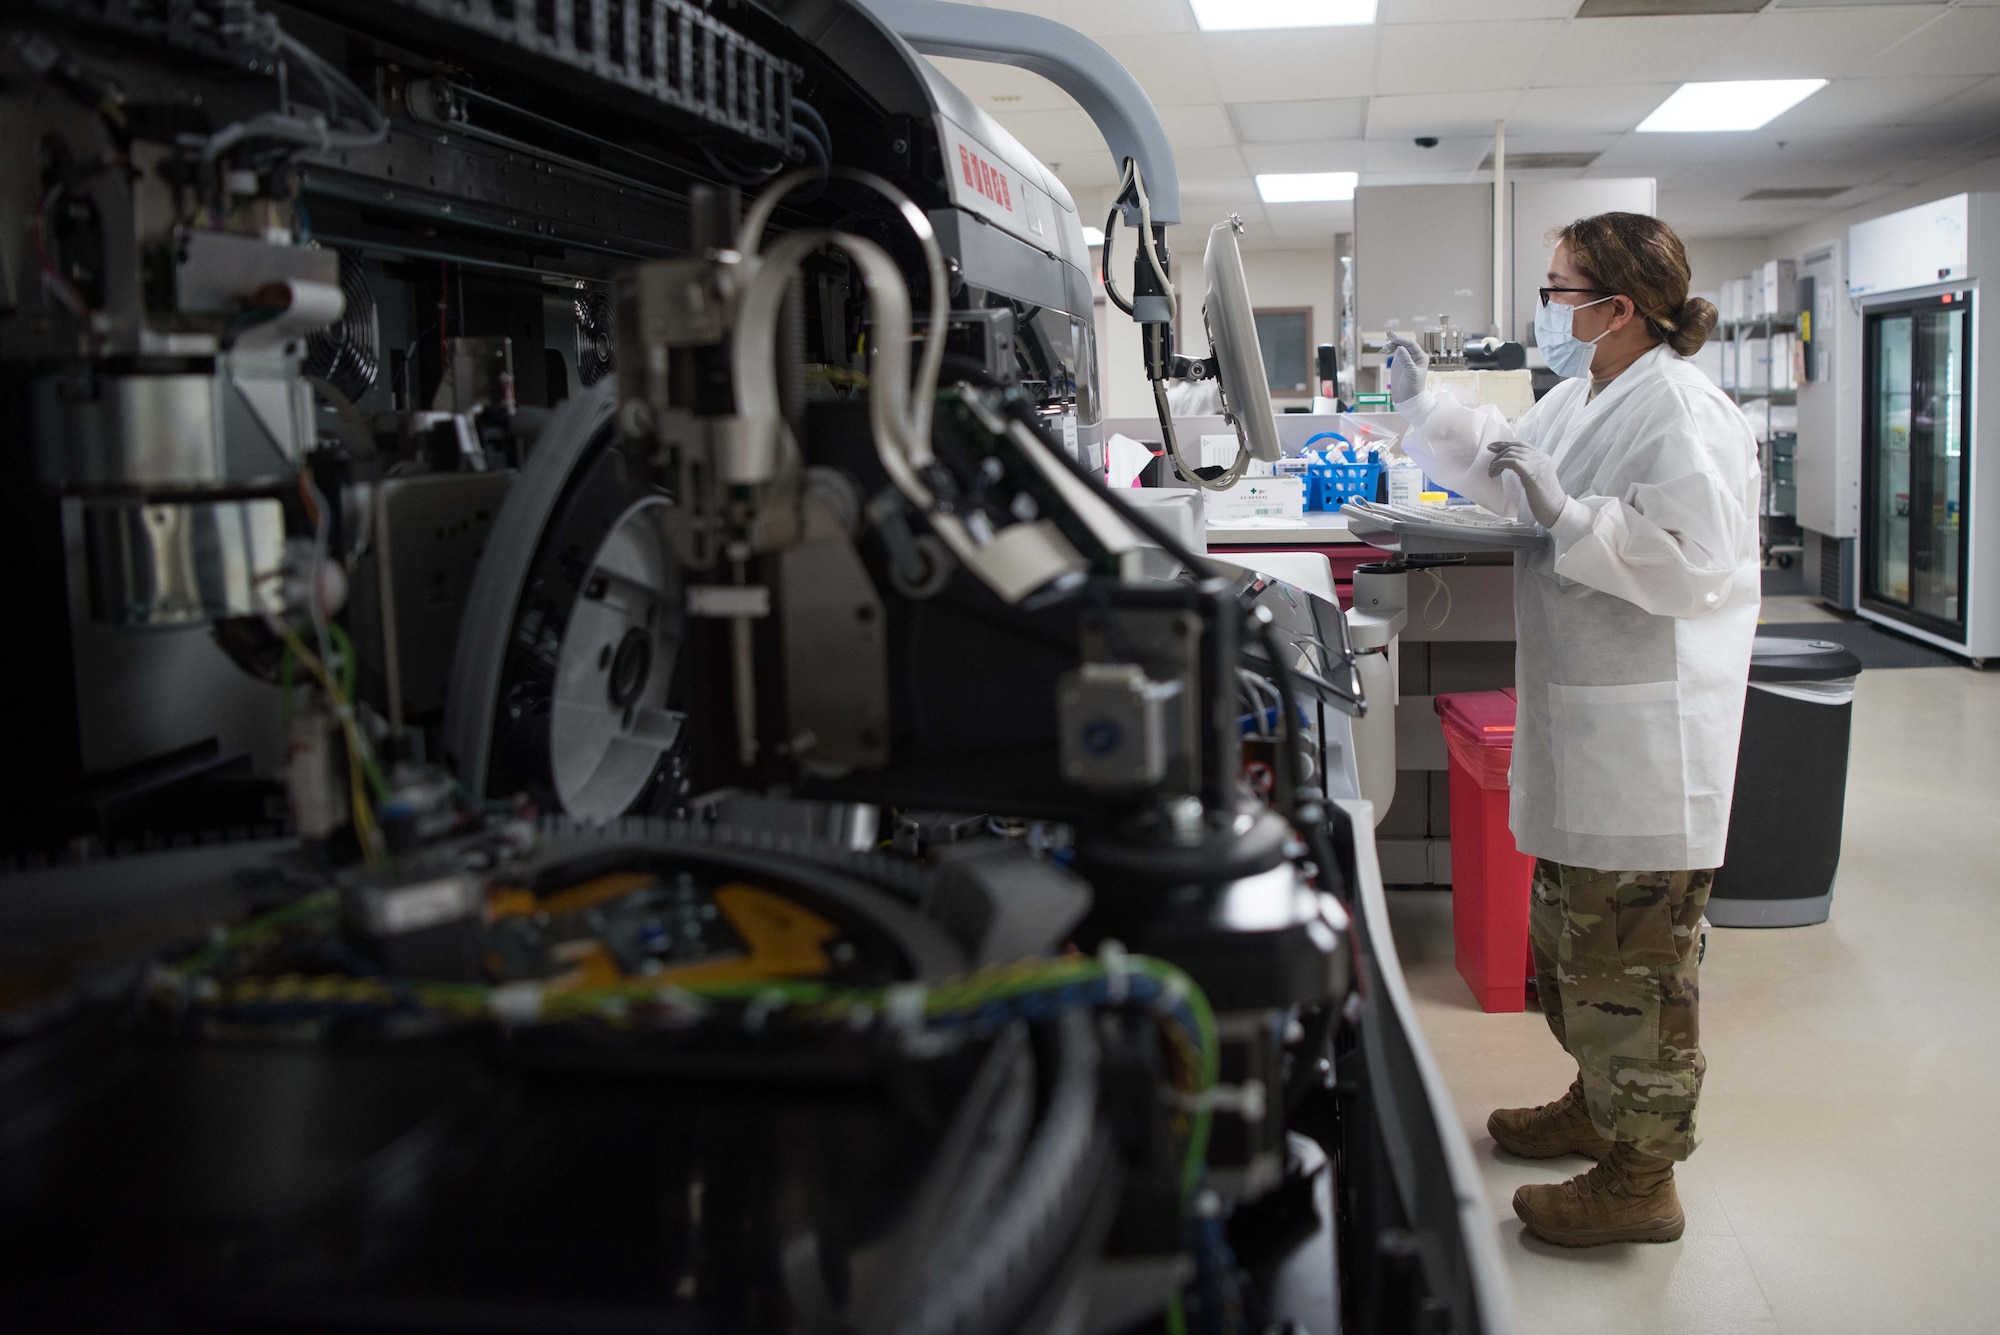 U.S. Air Force Staff Sgt. Maria Sibert, 22nd Medical Support Squadron lab technician, cleans a chemistry analyzer at McConnell Air Force Base, Kansas, July 20, 2020. The chemistry analyzer tests plasma samples for abnormalities such as high or low cholesterol, electrolytes, thyroid hormones and diabetes. (U.S. Air Force photo by Senior Airman Alexi Bosarge)